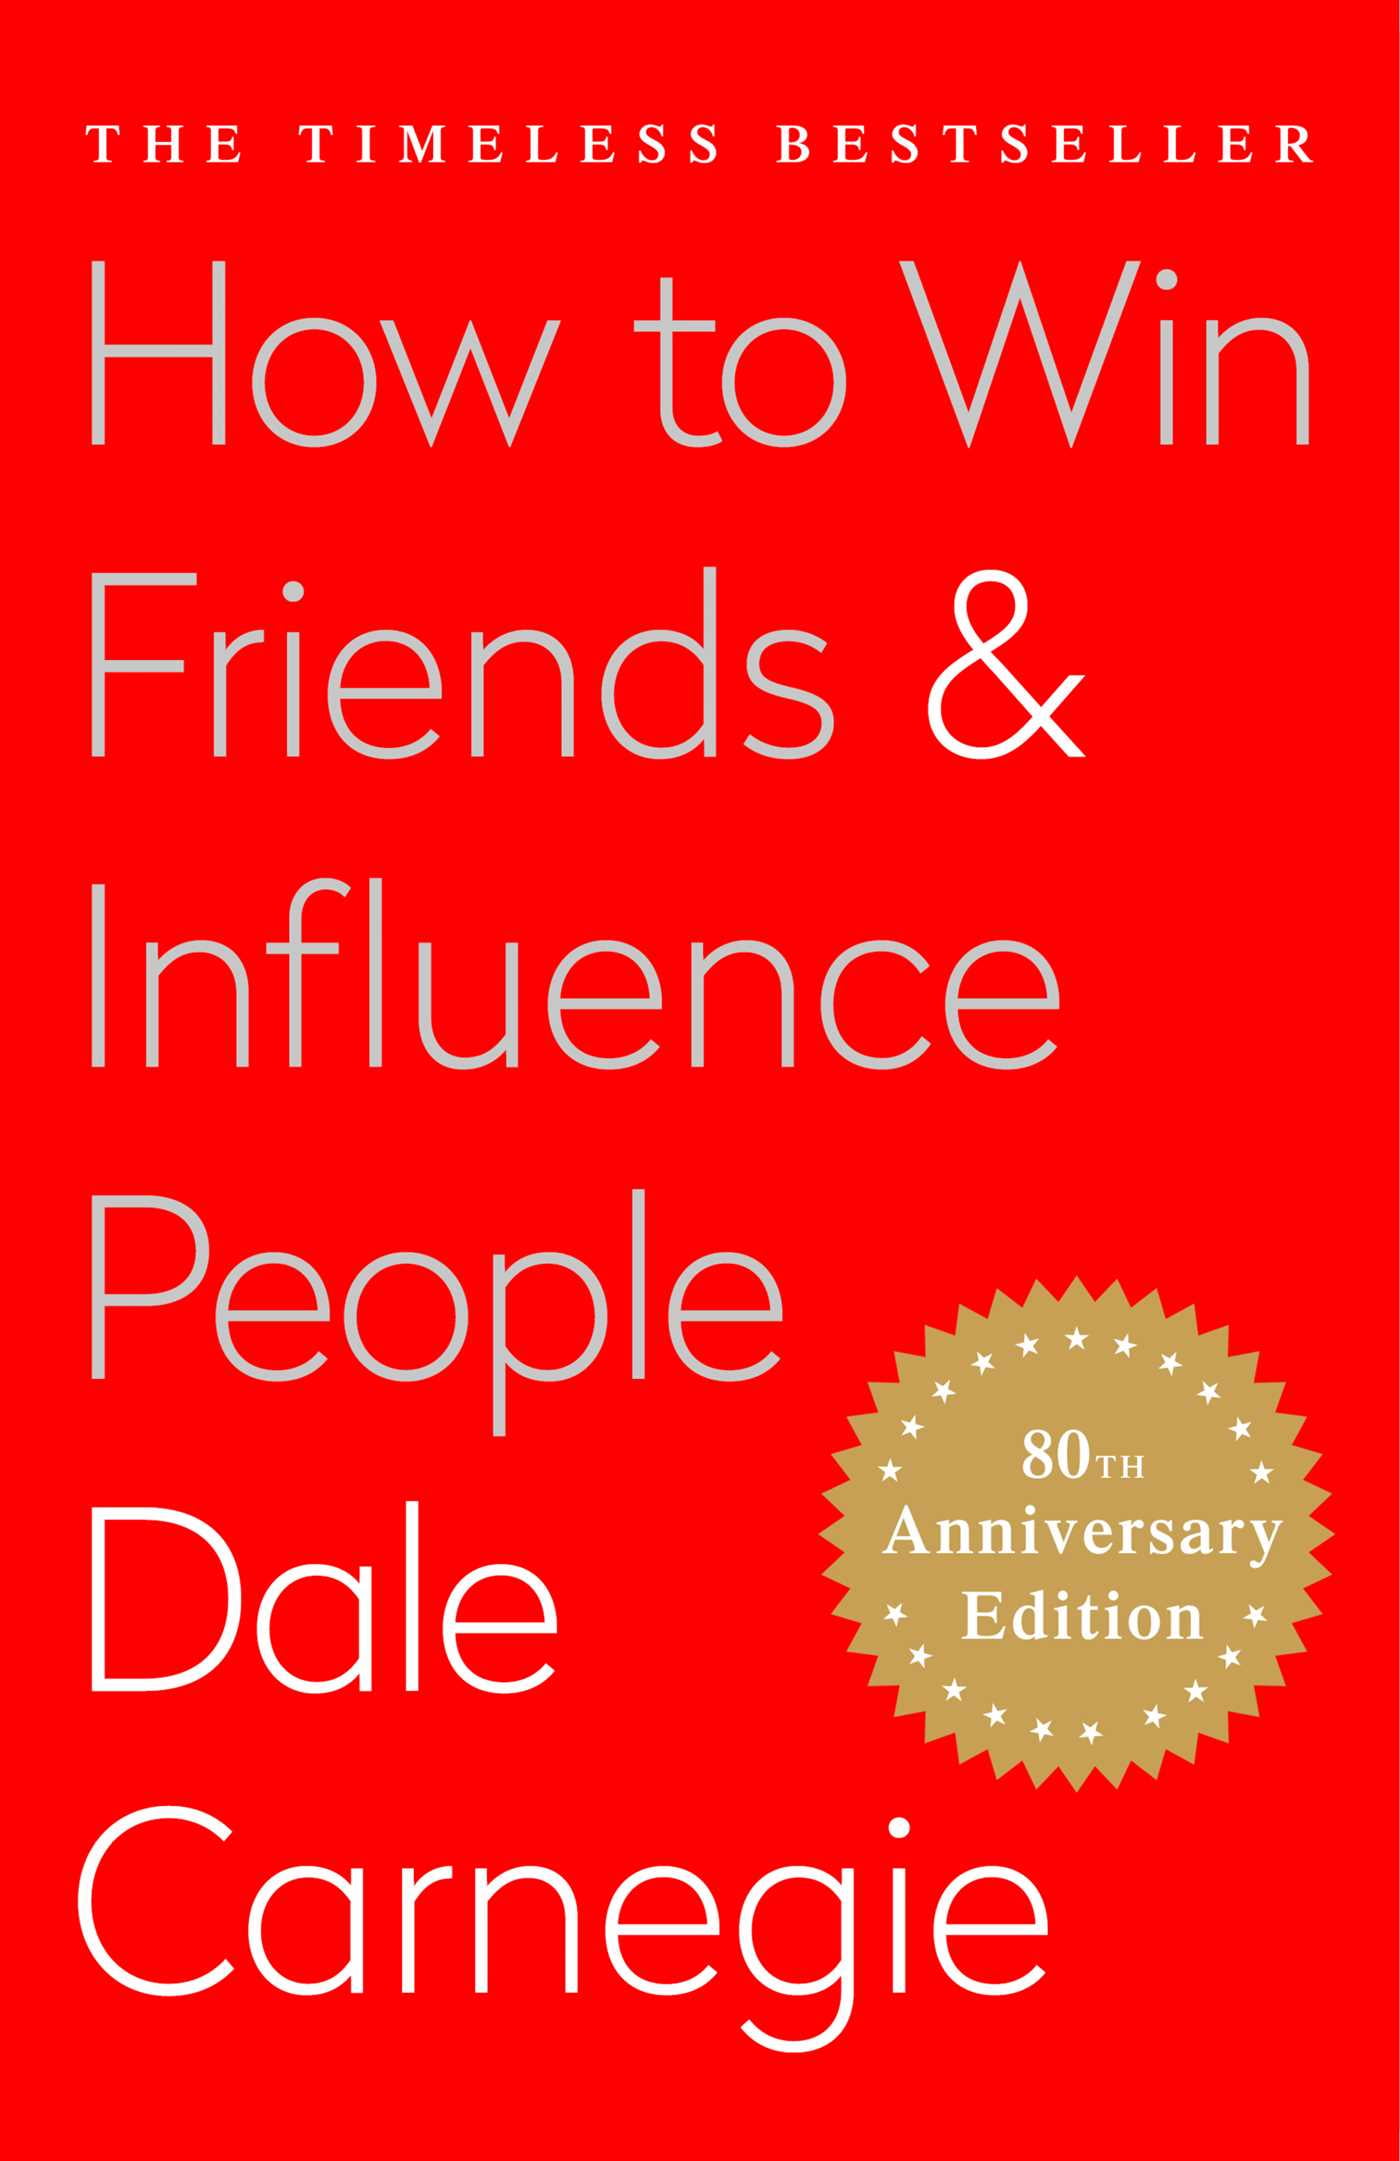 How To Win Friends And Influence People The Only Book You Need To Lead